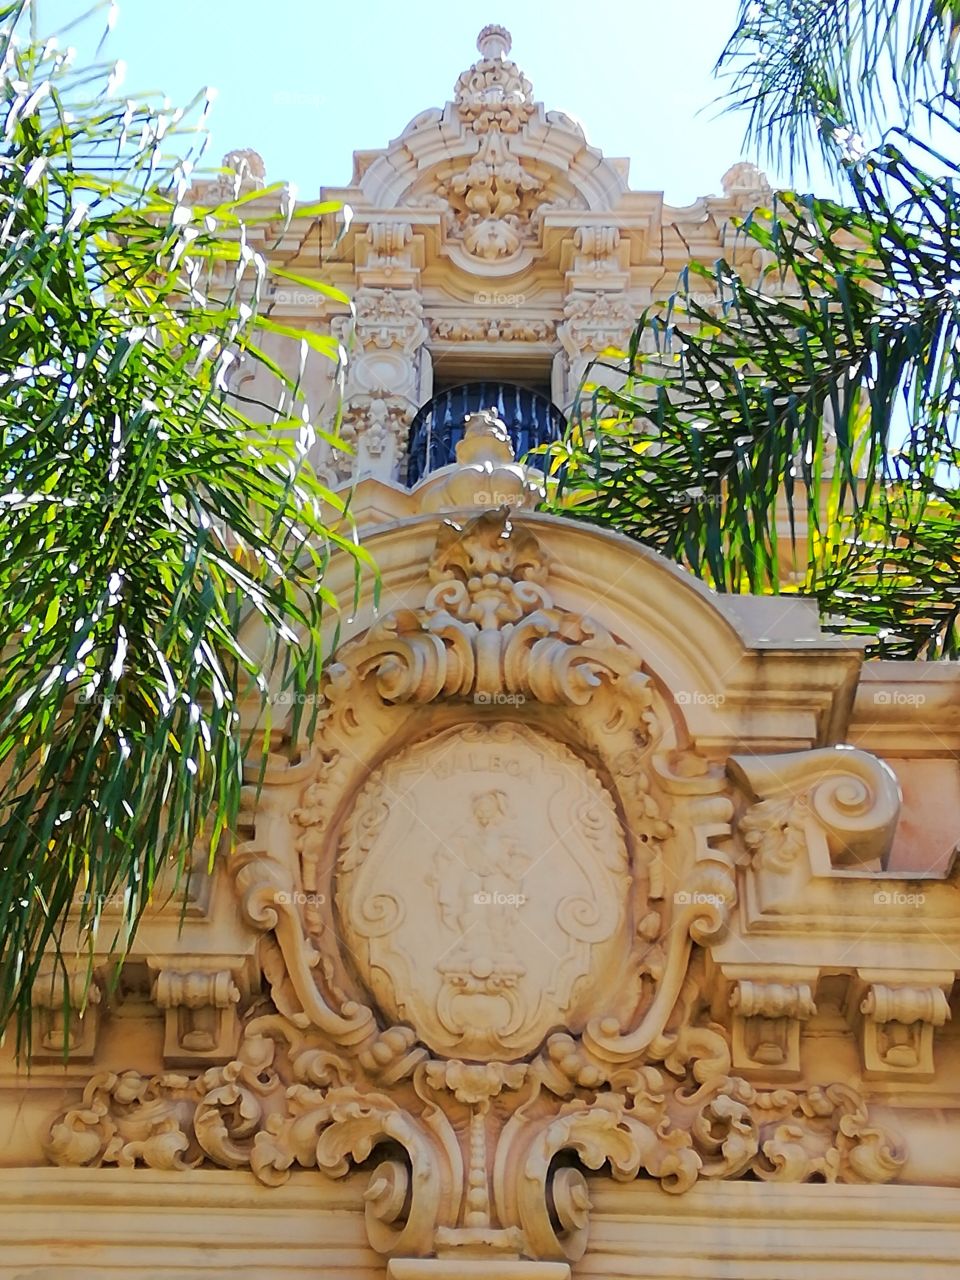 Every inch of Balboa Park is a complete statement of art. Casa Del Prado, exterior.